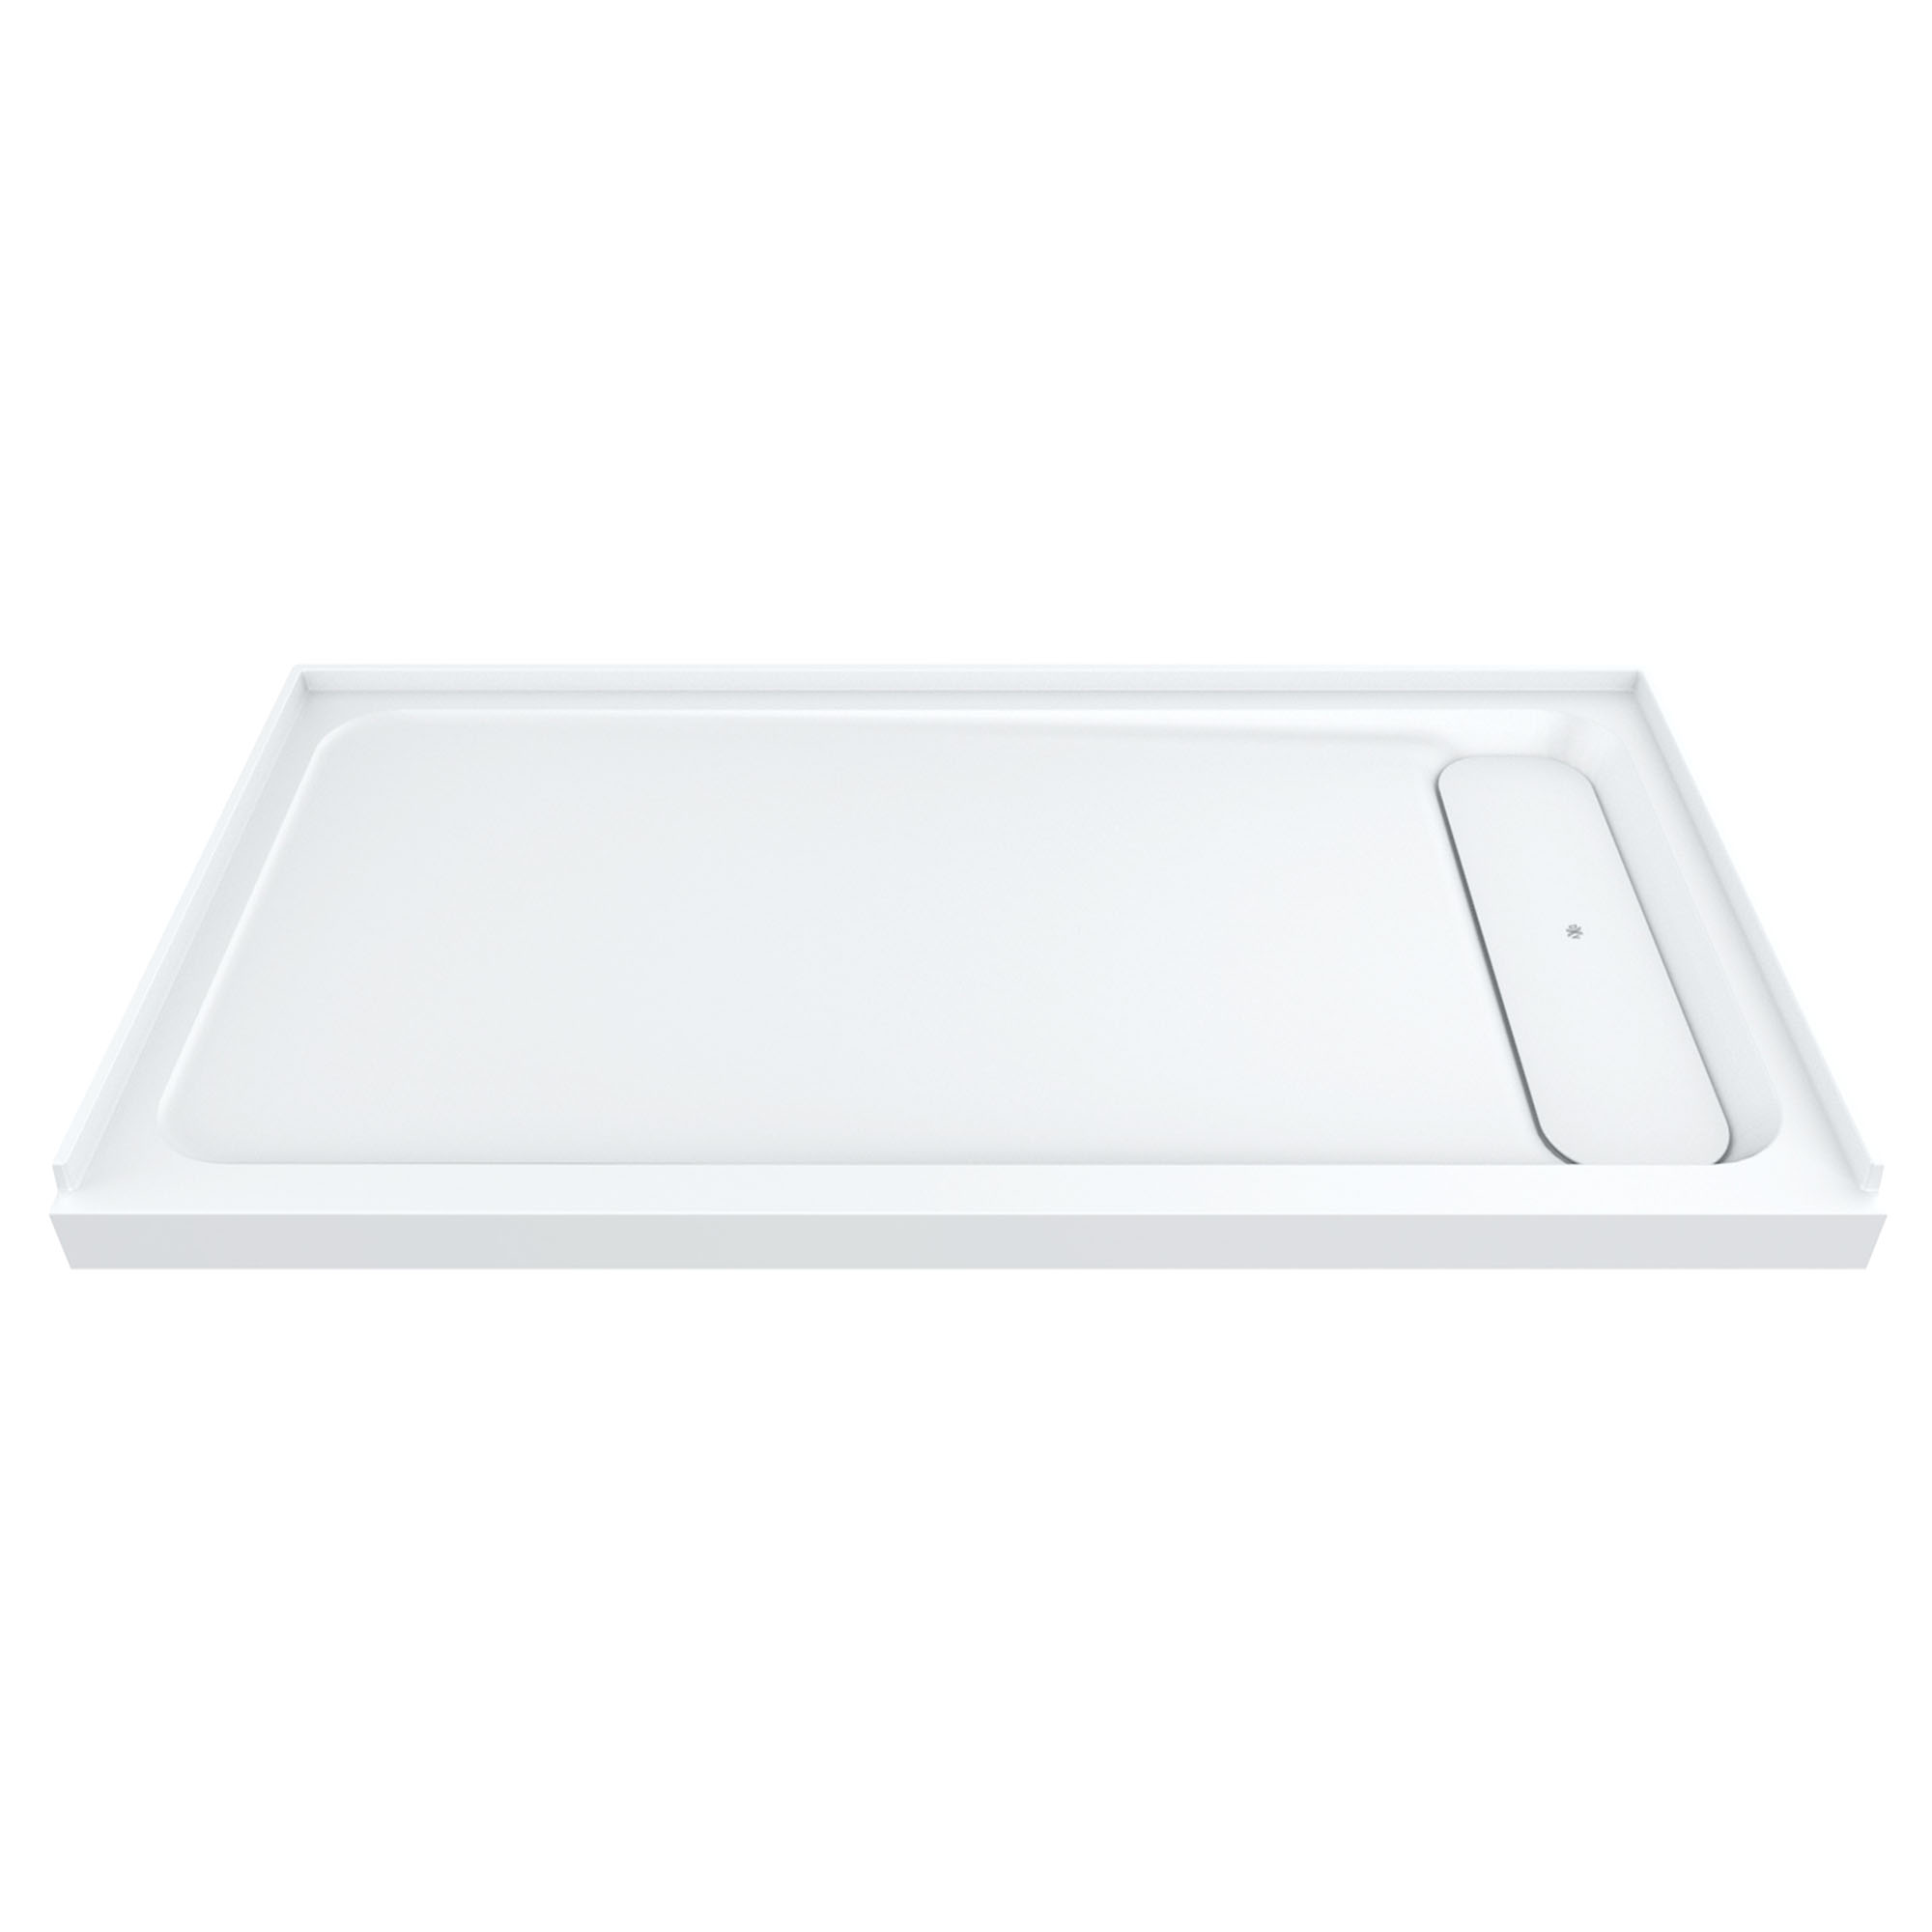 Modulus 60 x 30 in. Shower Base with Right Hand Drain